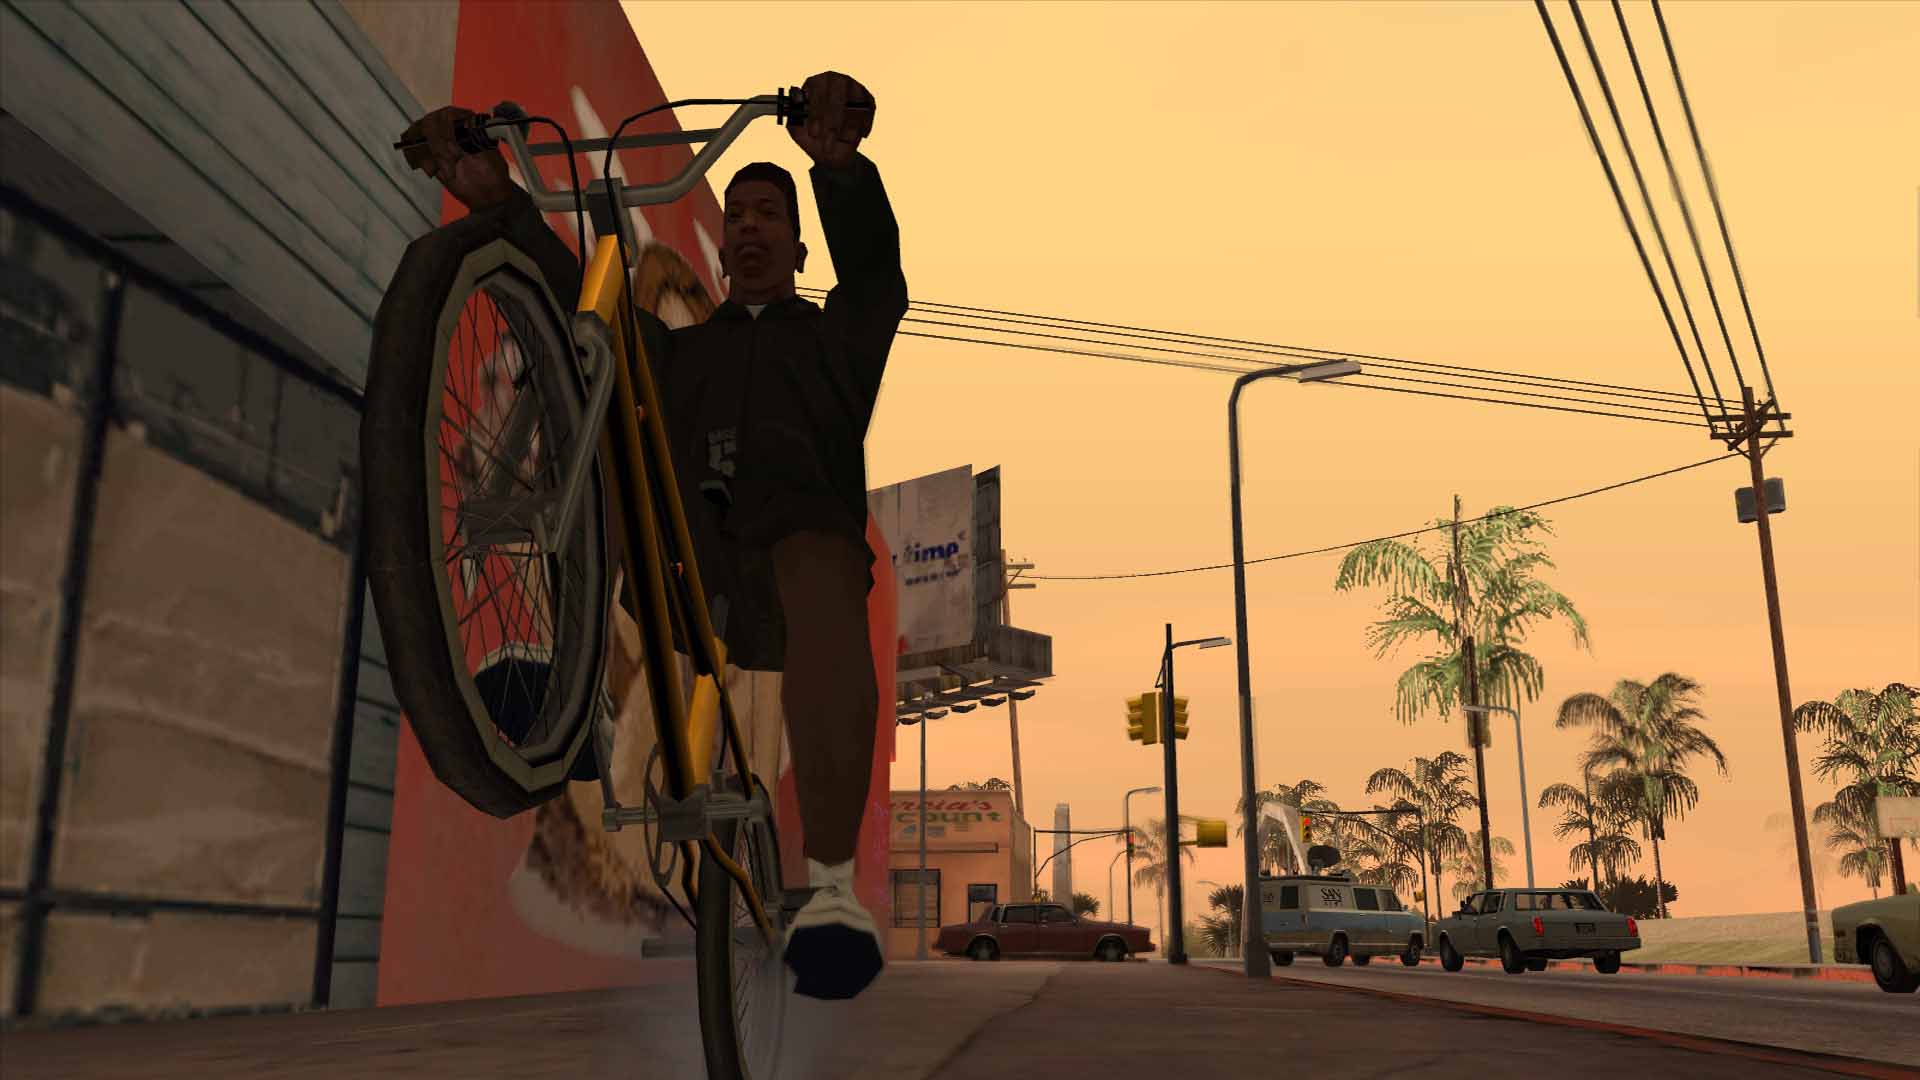 Grand Theft Auto 3, Vice City and San Andreas remasters reportedly real